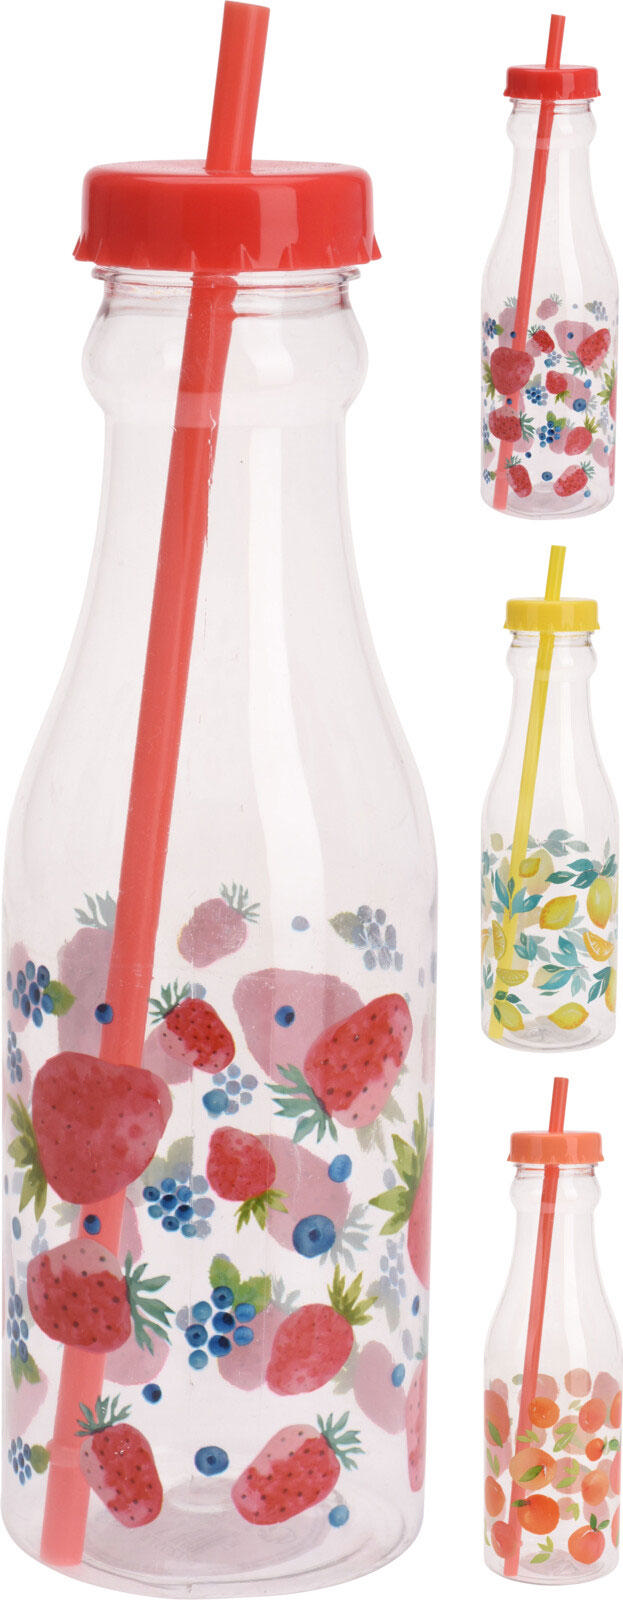 DRINKING BOTTLE WITH STRAW 650ML 3 ASSORTED DESIGNS